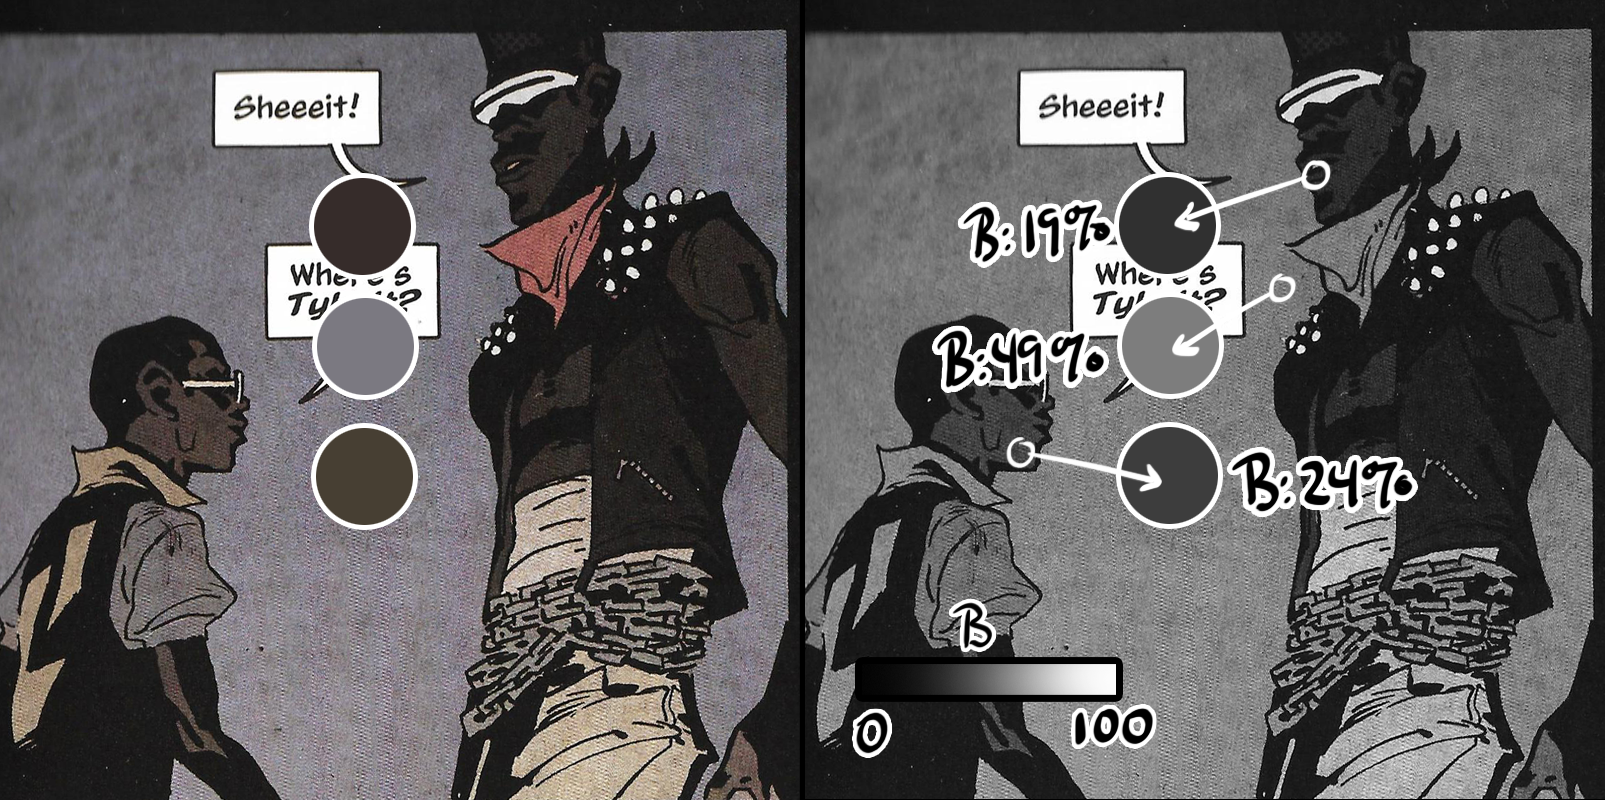 A side-by-side comparison of a panel from the Prince of Cats graphic novel, color version on the left, black and white version on the right. Two characters stand on top of a city building at night. The panel demonstrates how two dark-skinned characters are rendered in a dark color while the sky behind them is a lighter value. The contrast makes the two characters stand out, but even though the sky is a lighter hue, it still reads as a night scene.